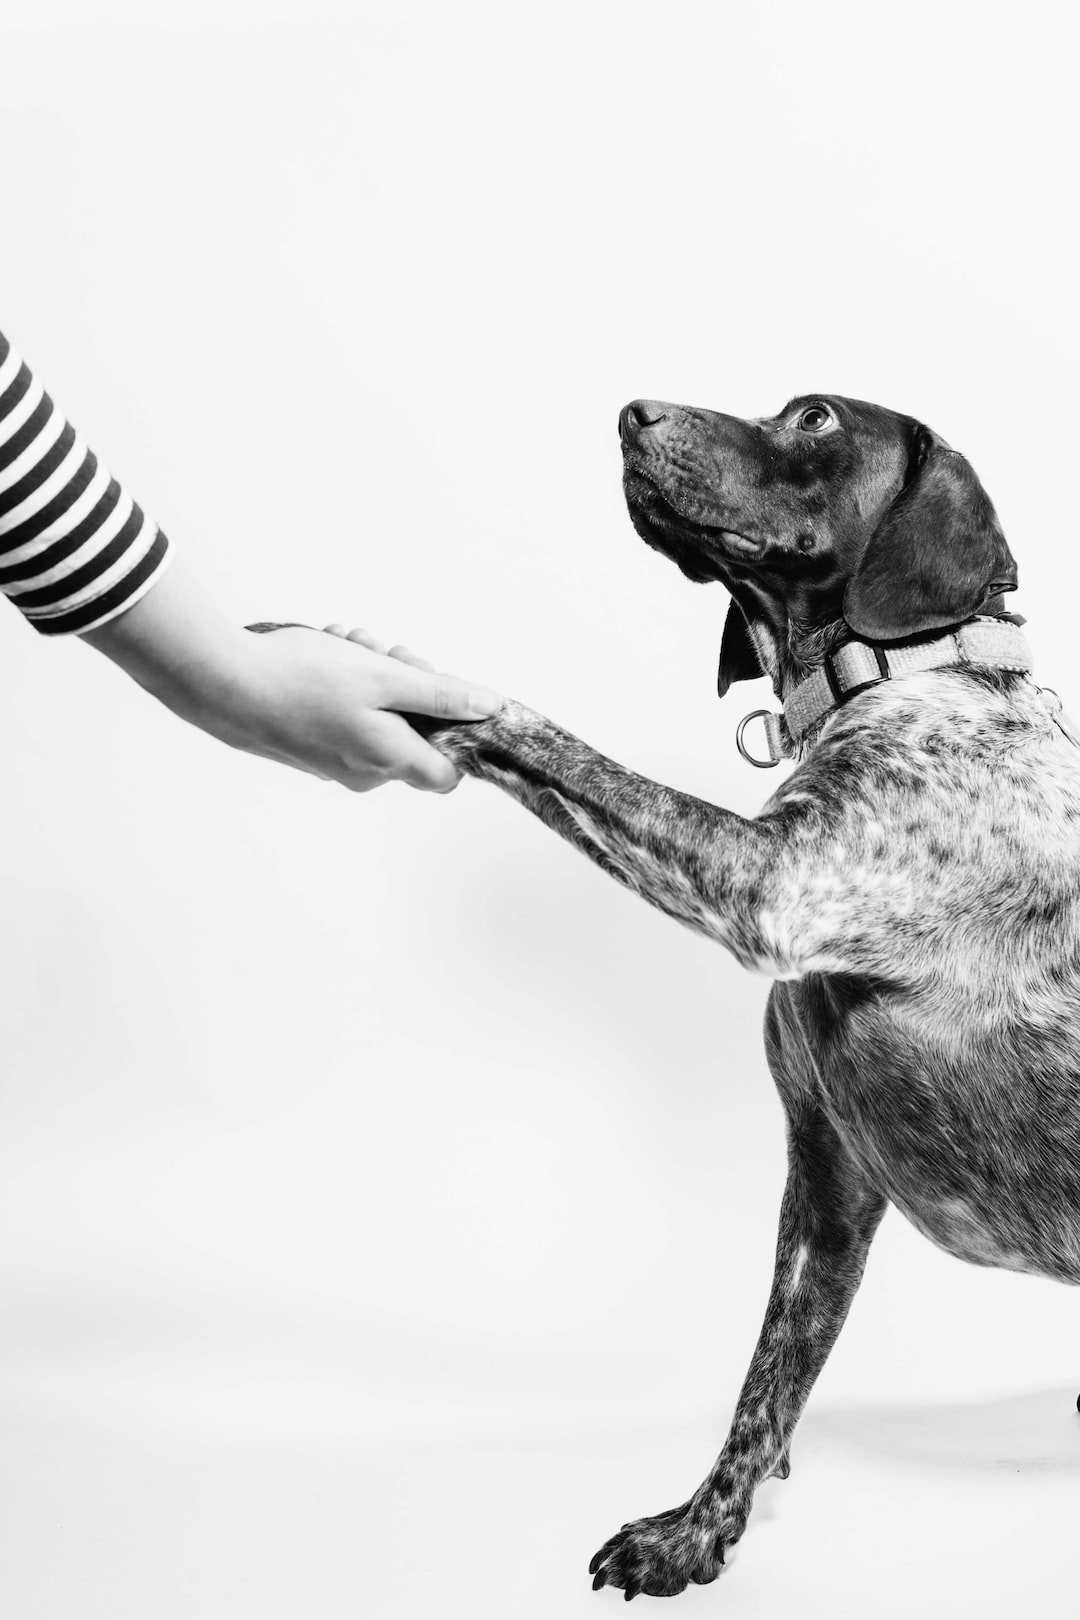 3 Things Cleveland Landlords Should Know About Support Animals